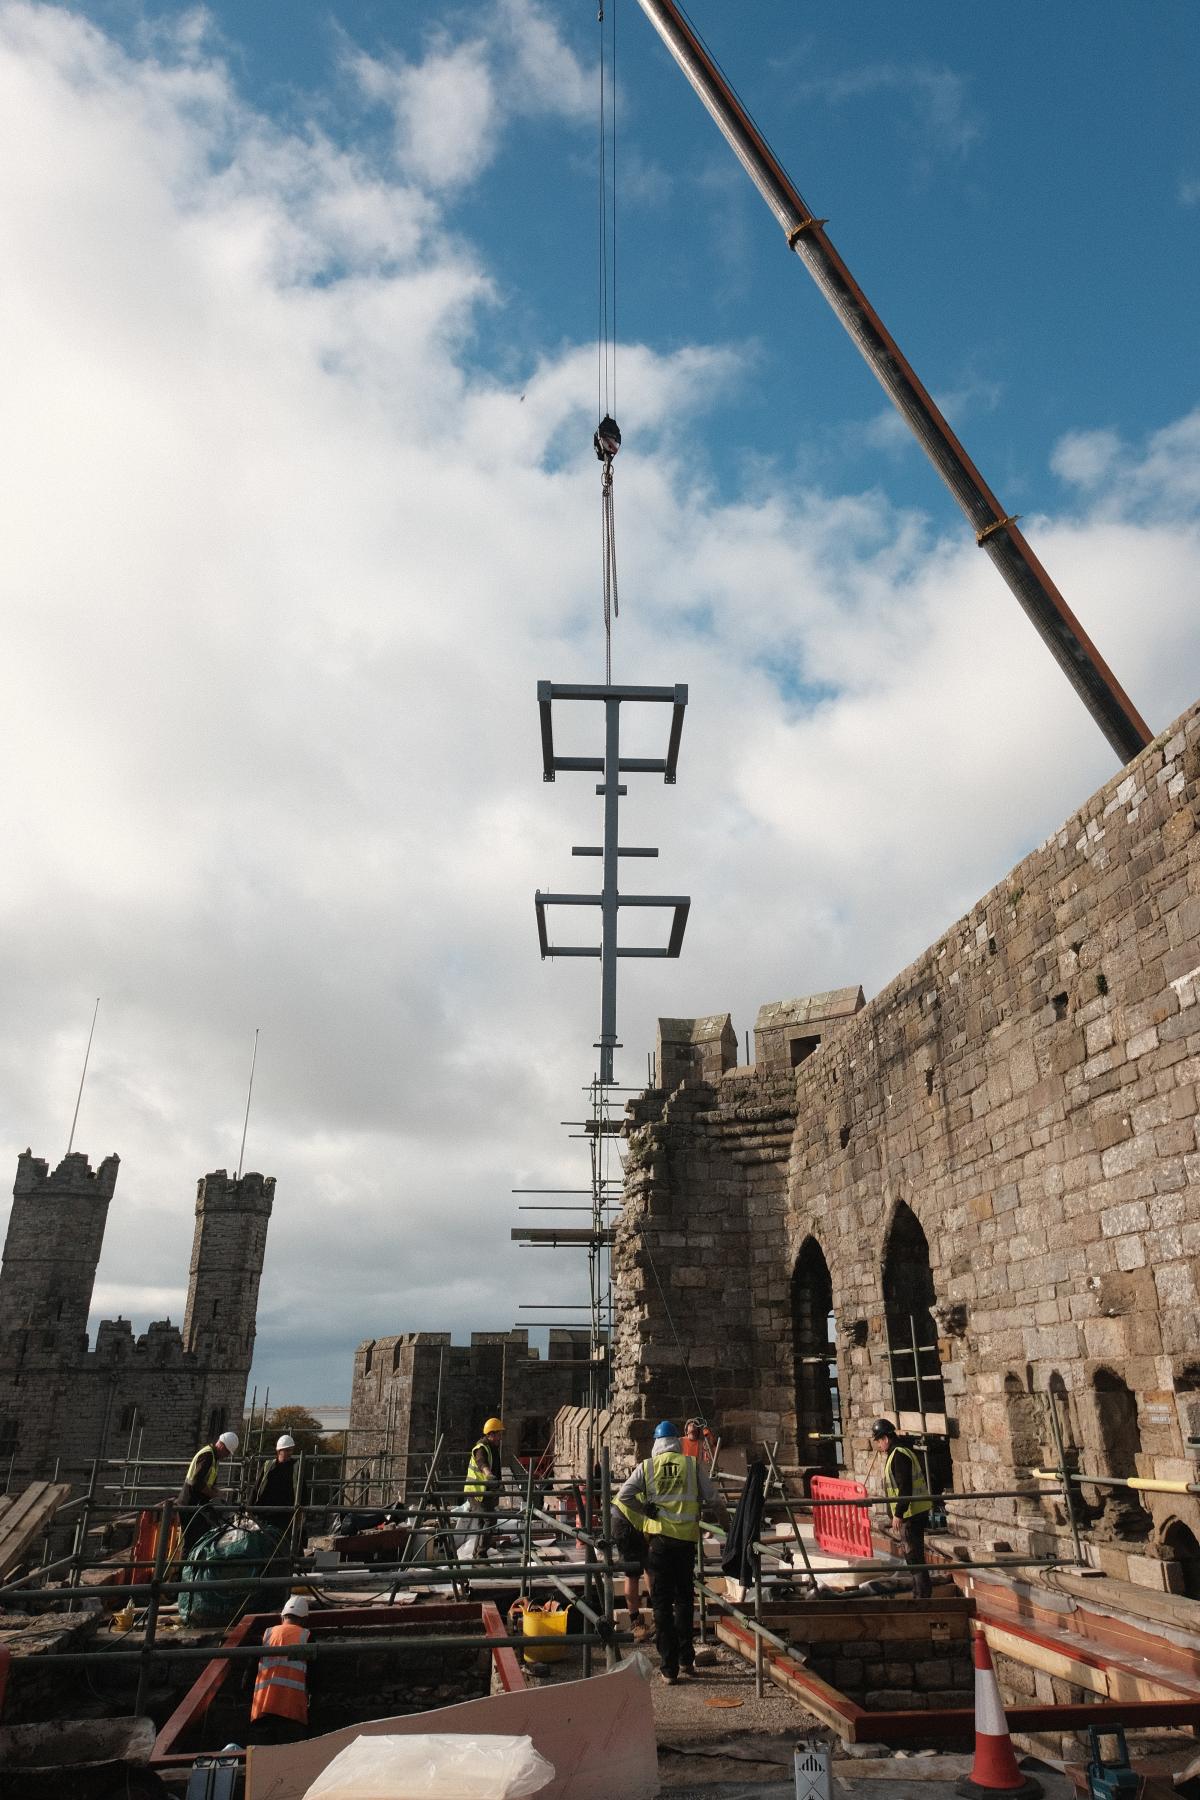 Construction image of the lift installation at Caernarfon Castle - a crane placing the lift on the upper deck.